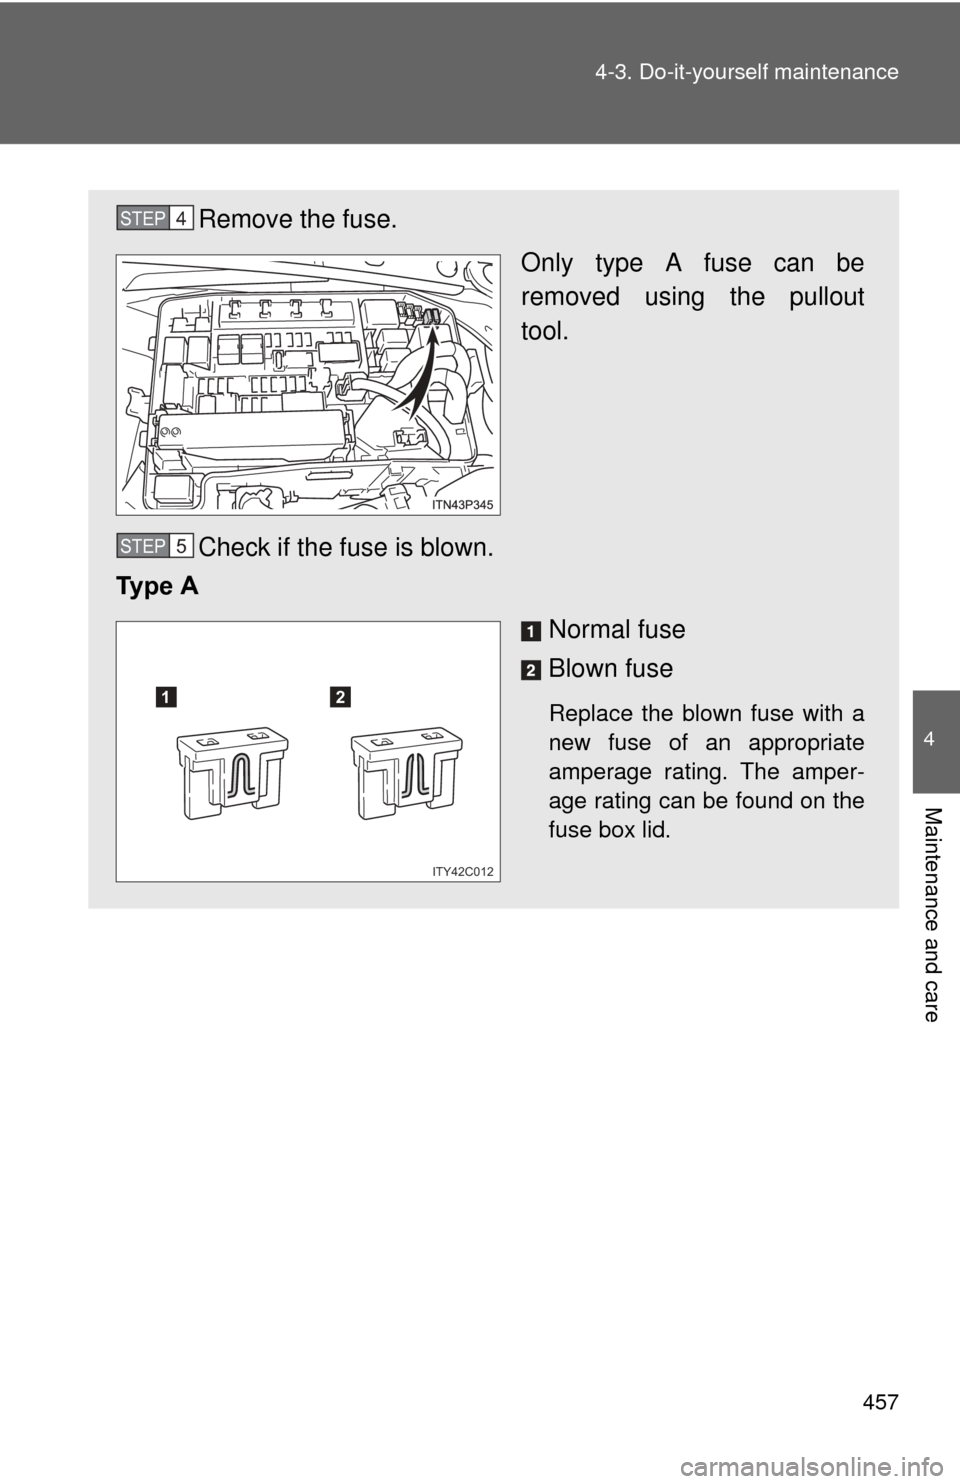 TOYOTA PRIUS 2012 3.G Owners Manual 457
4-3. Do-it-yourself maintenance
4
Maintenance and care
Remove the fuse.
Only type A fuse can be
removed using the pullout
tool.
Check if the fuse is blown.
Ty p e   A
Normal fuse
Blown fuse
Replac